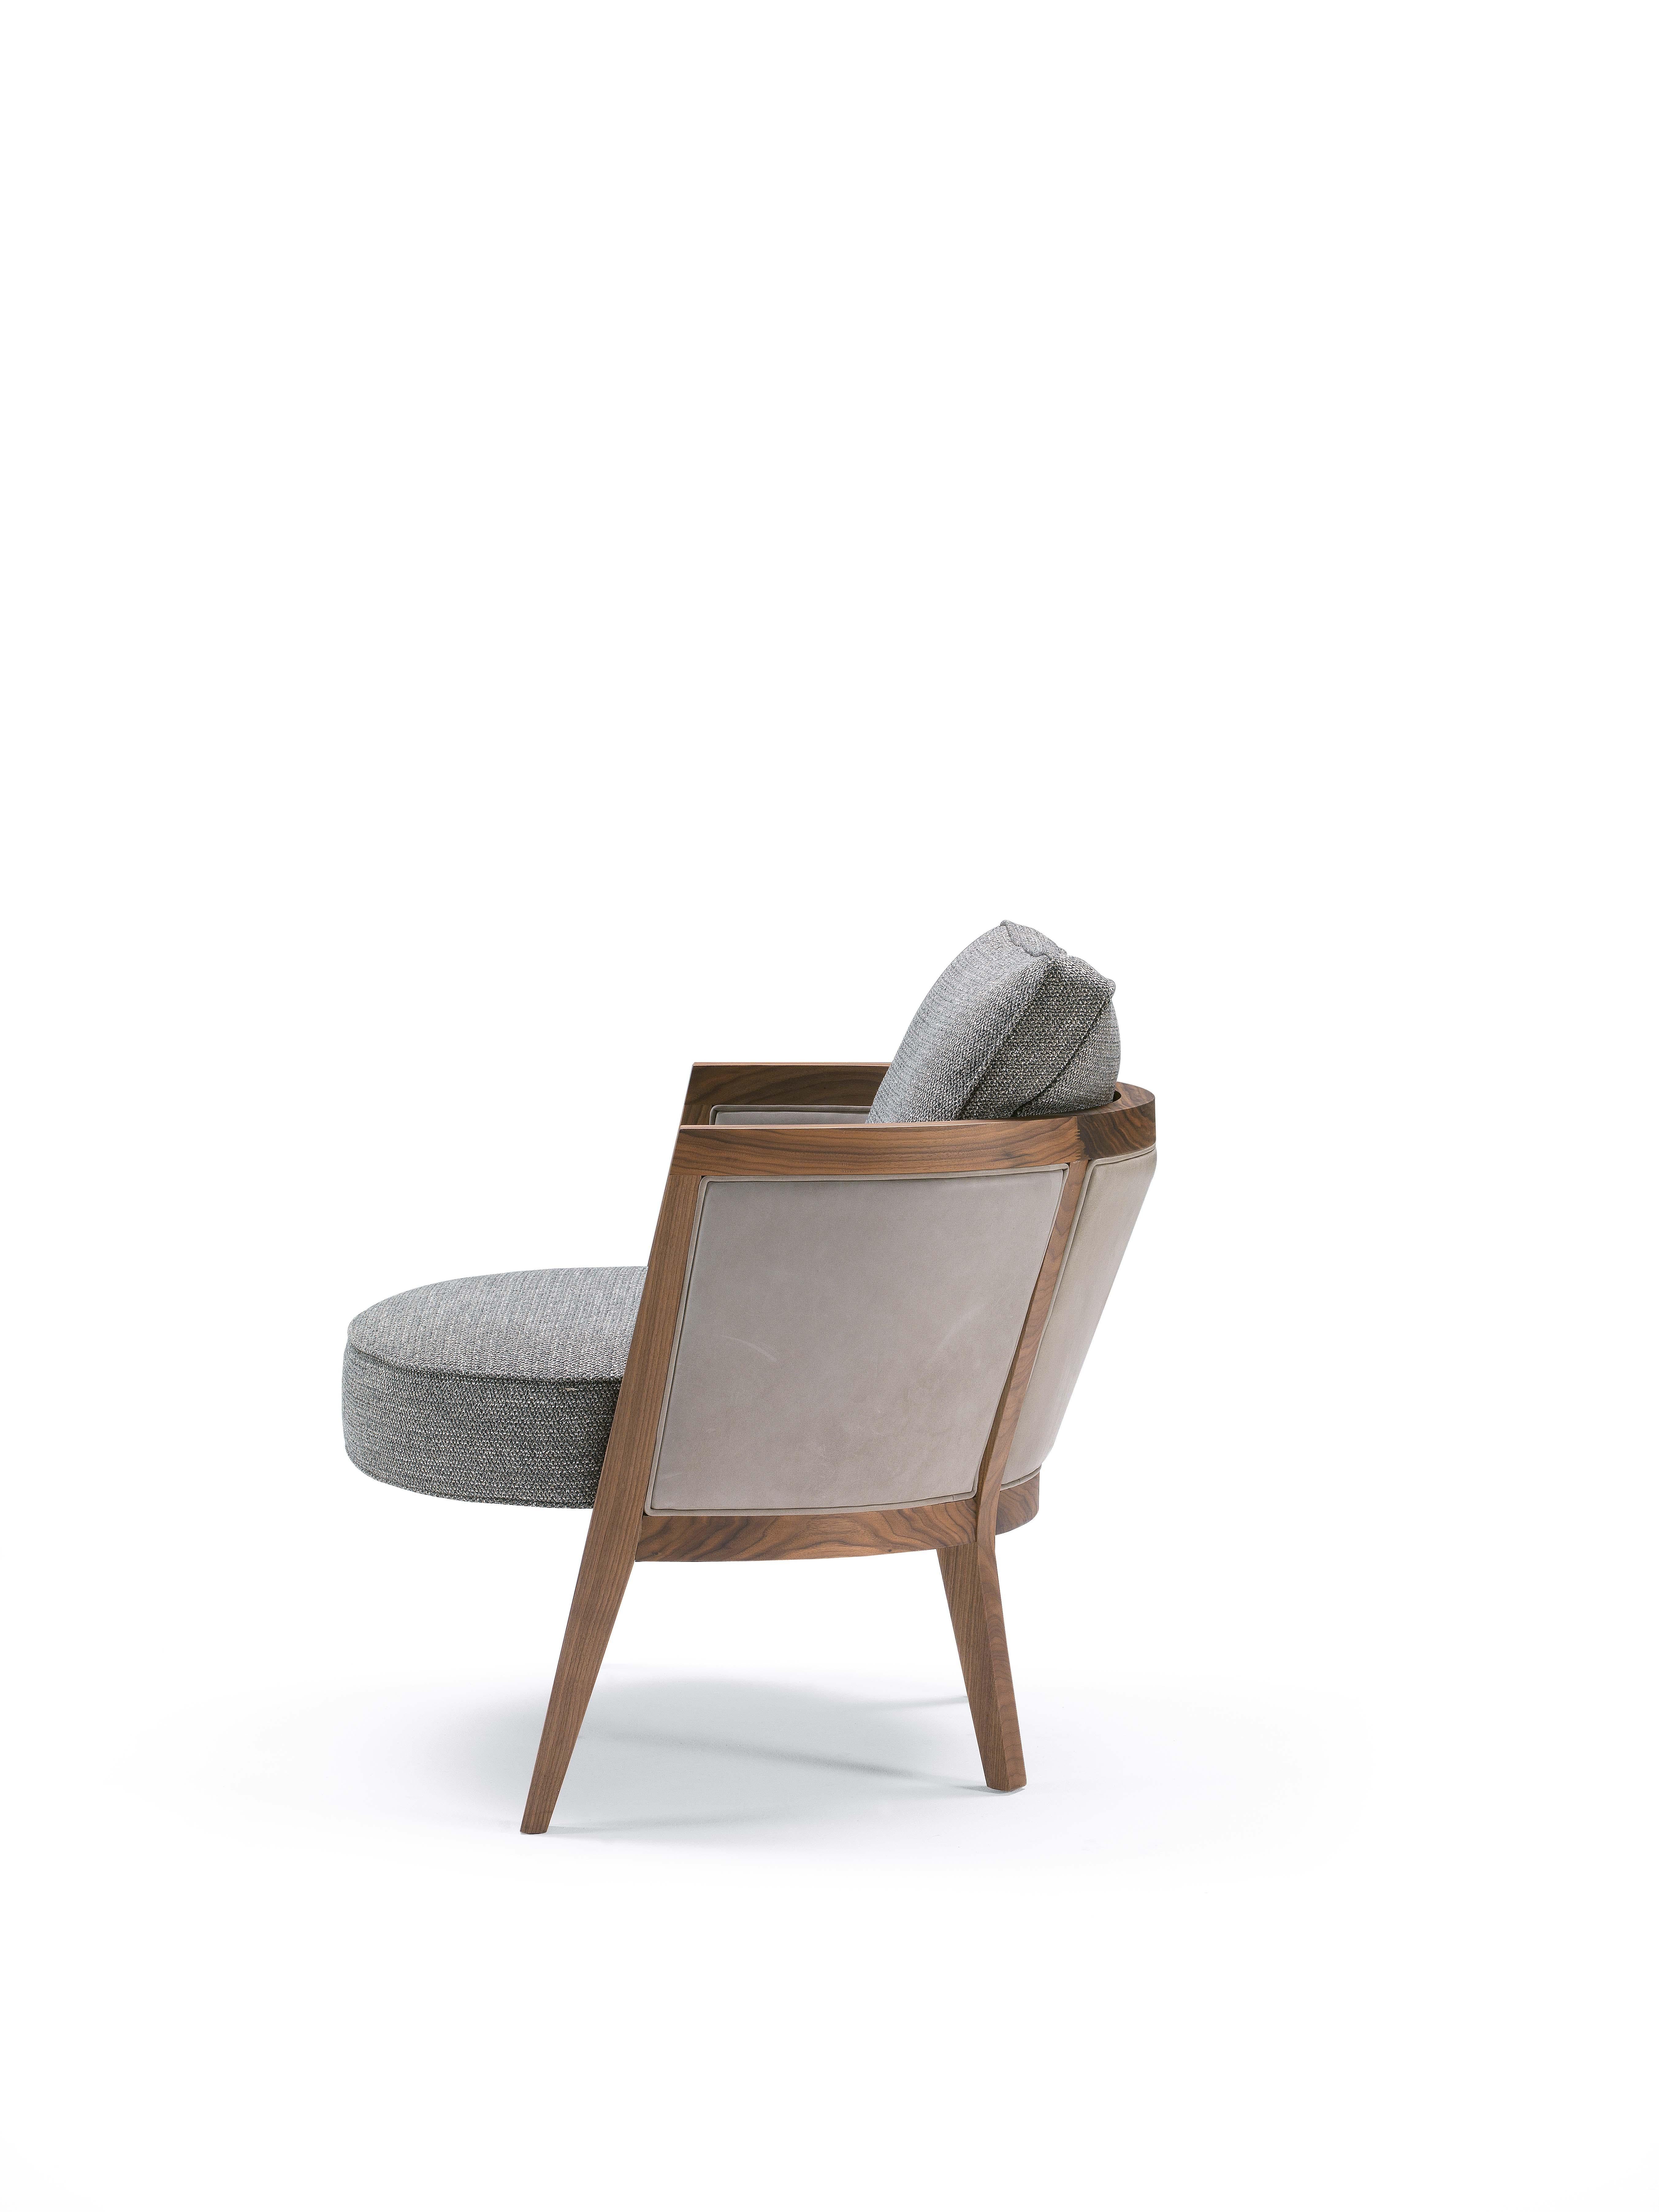 Italian Pacini & Cappellini Cocoon Armchair in Grey by Giuliano & Gabriele Cappellettii For Sale